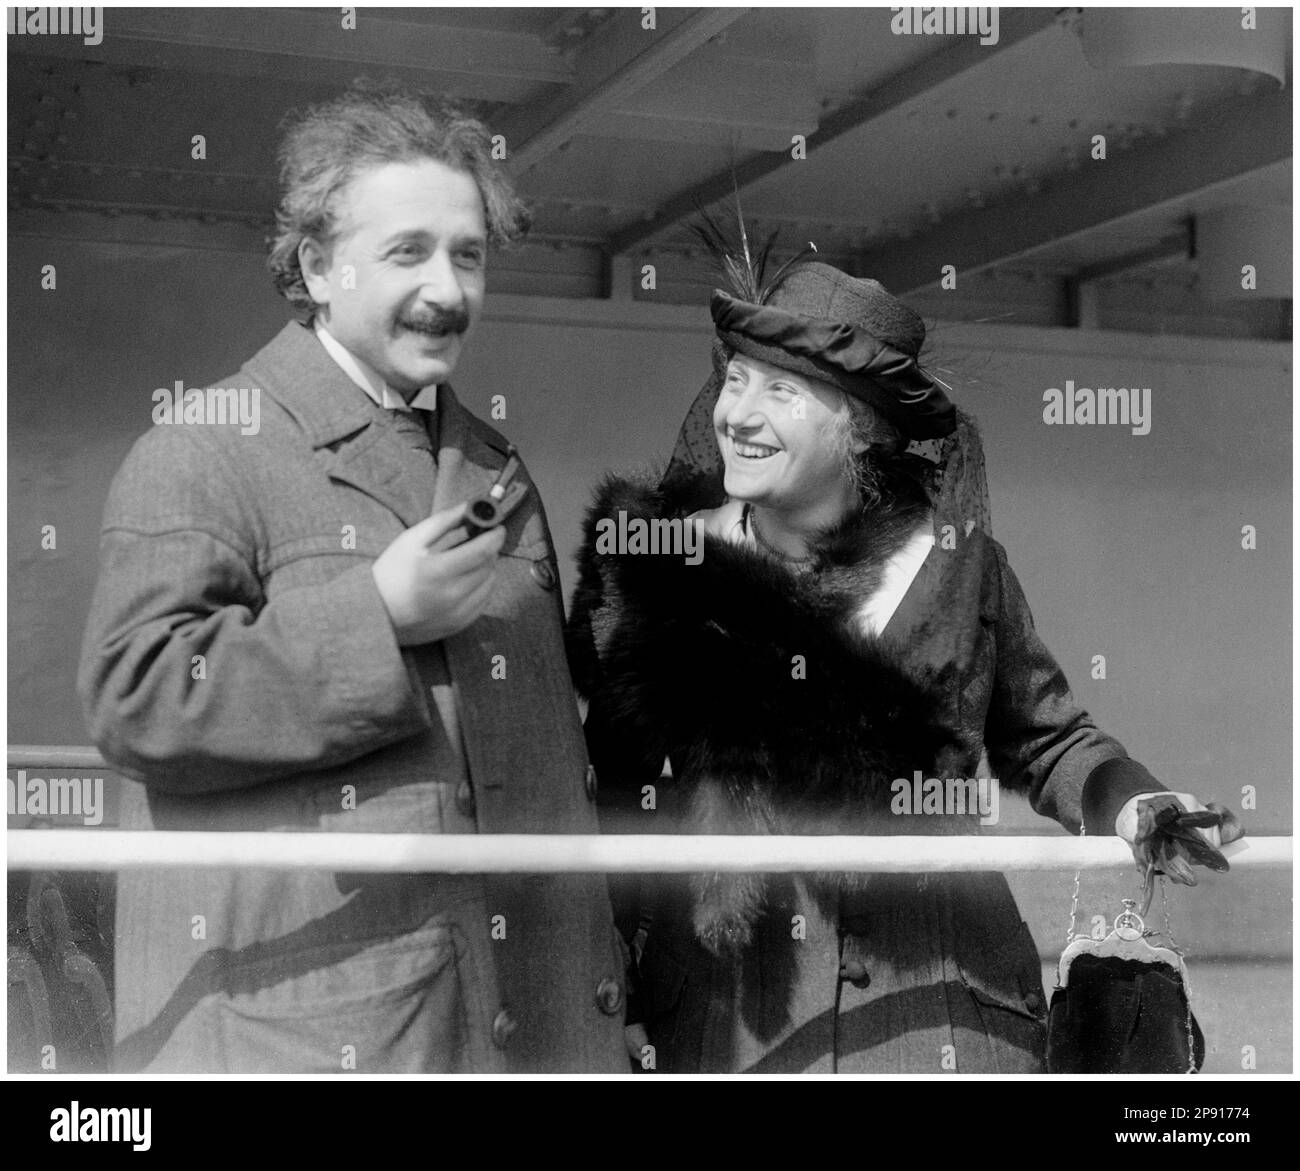 Albert Einstein (1879-1955), German born theoretical physicist, with his wife Elsa Einstein (1876-1936), arriving in New York aboard the SS Rotterdam, photograph by Bain News Service, 1915-1920 Stock Photo